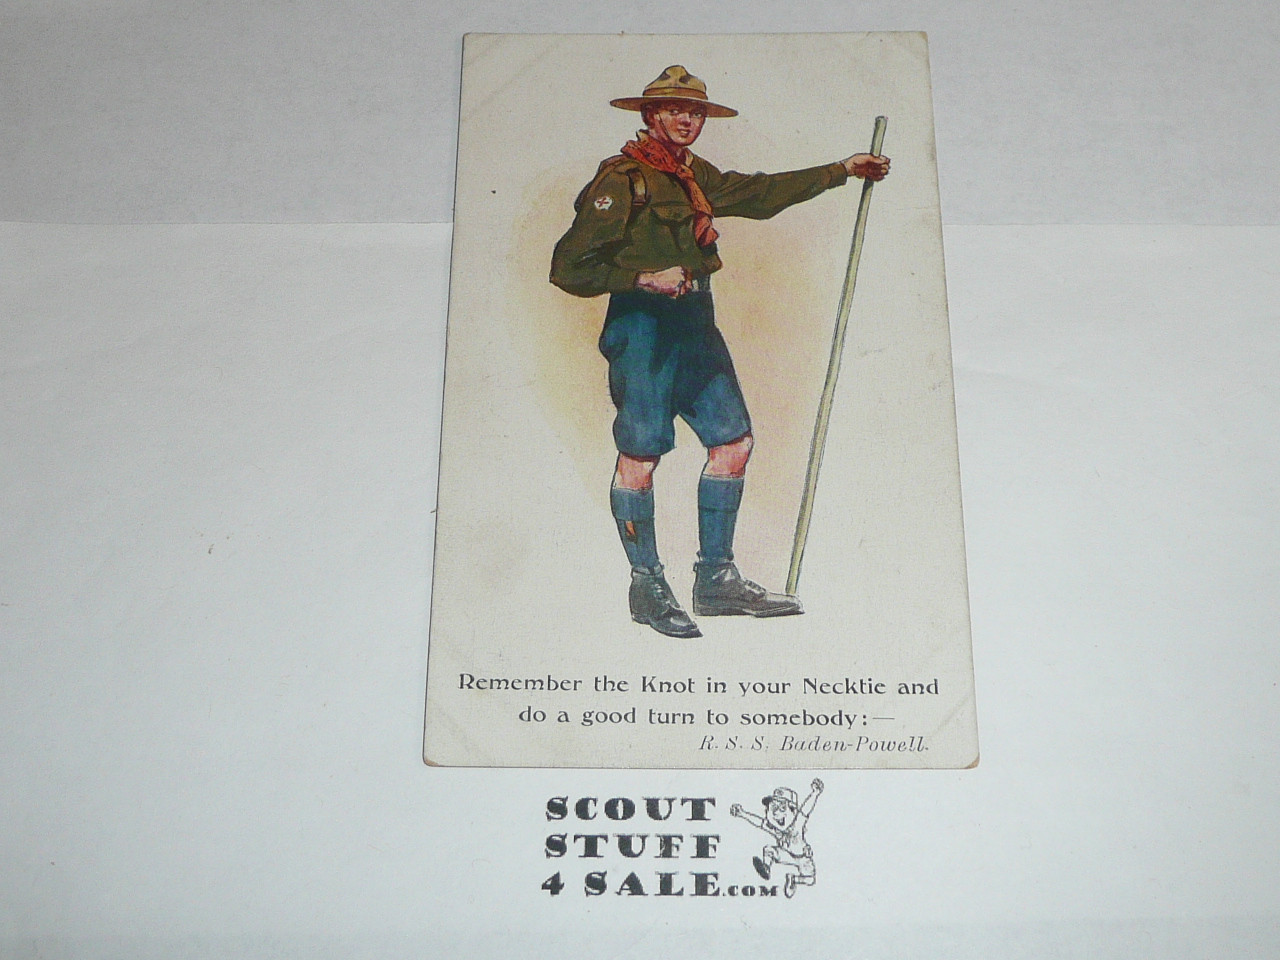 1913 British Boy Scout Postcard, Remember to Knot your Necktie and do a Good Turn to Somebody